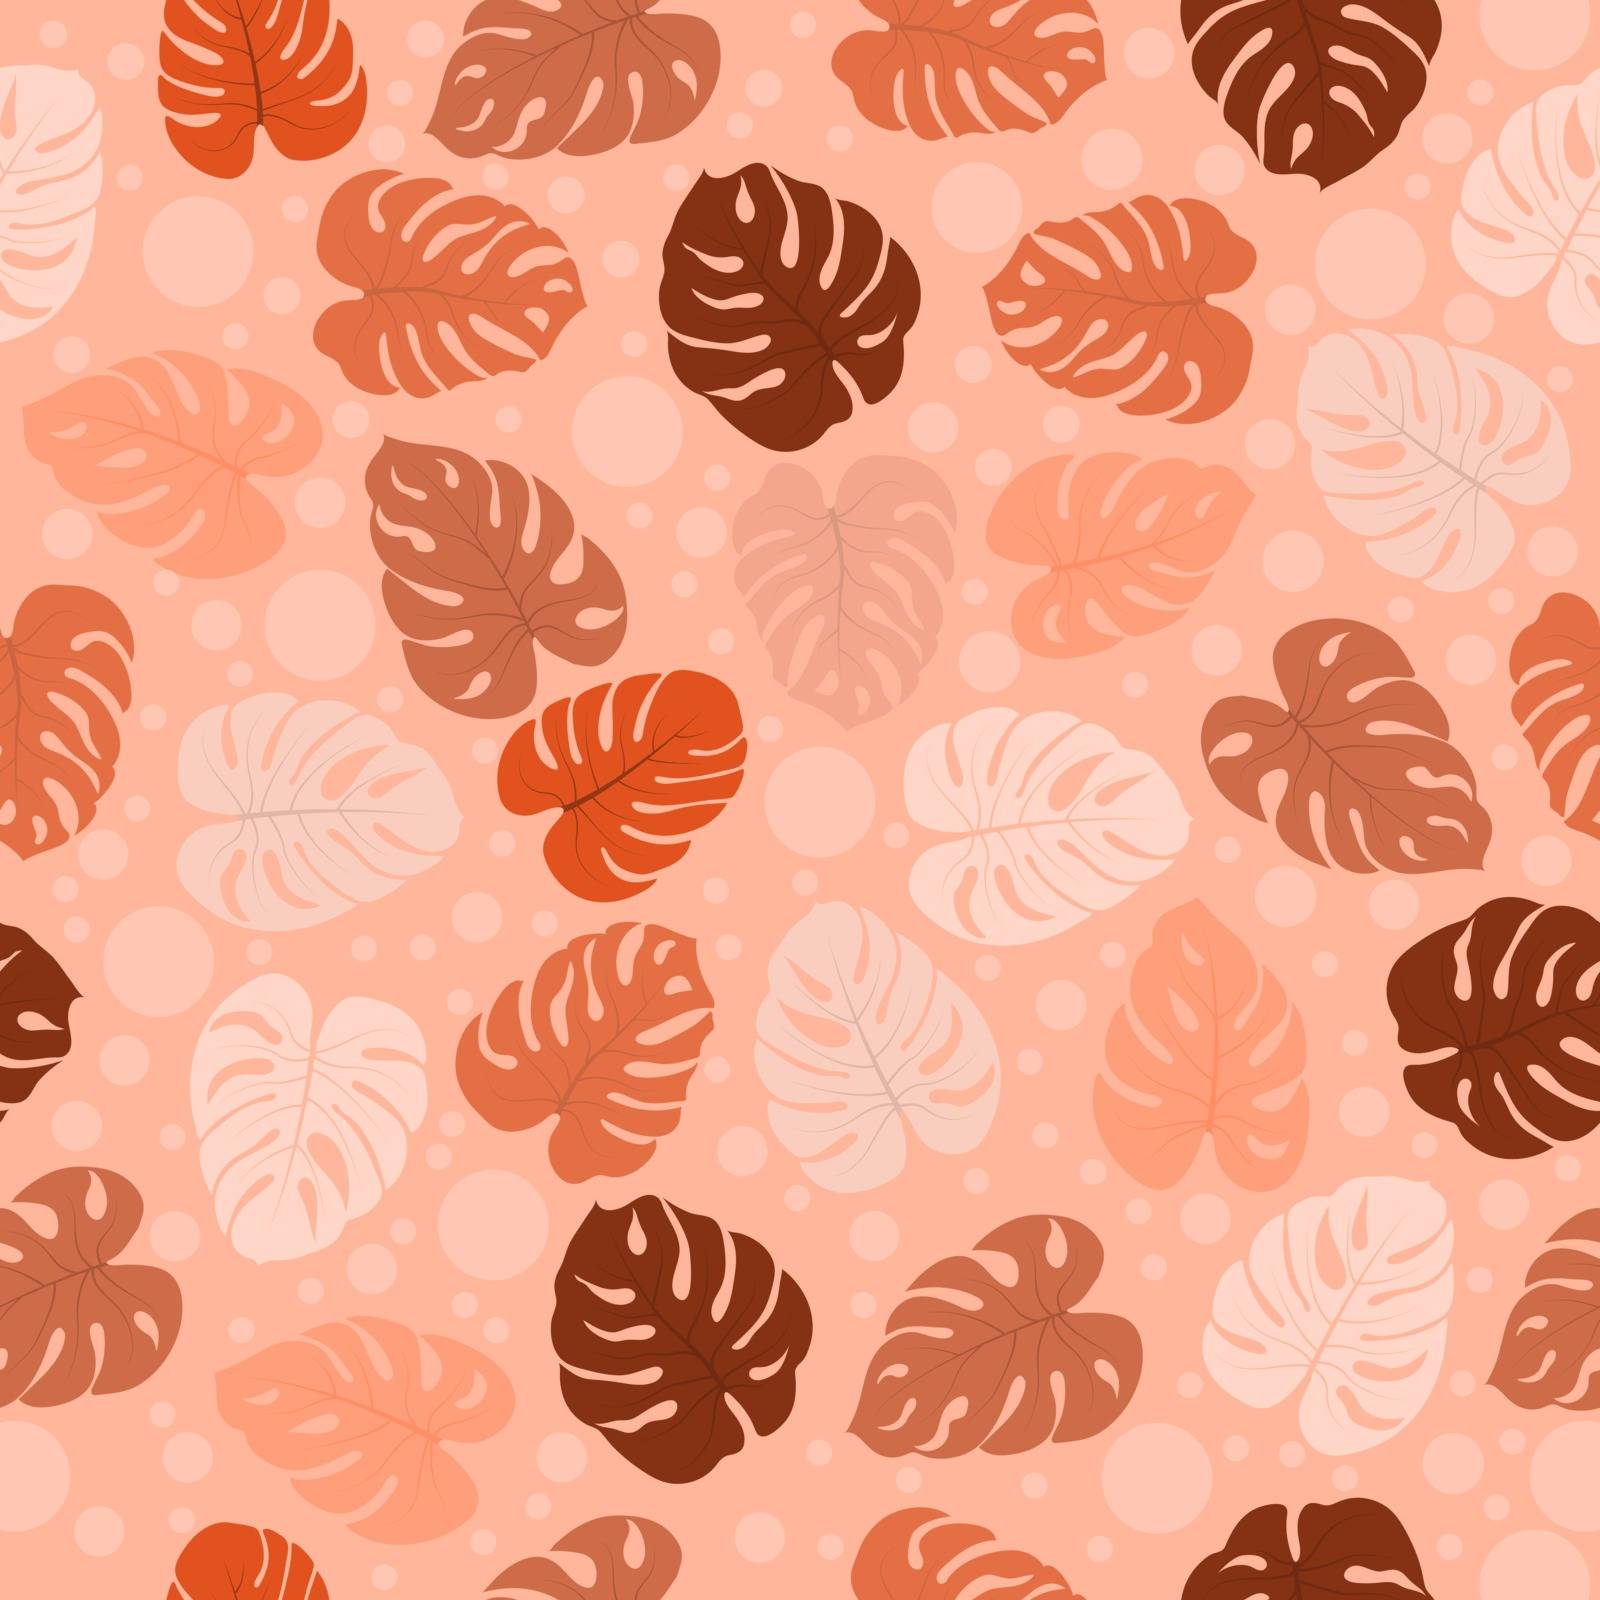 Seamless pattern with tropical plants leaves and monster bubbles by Grommik